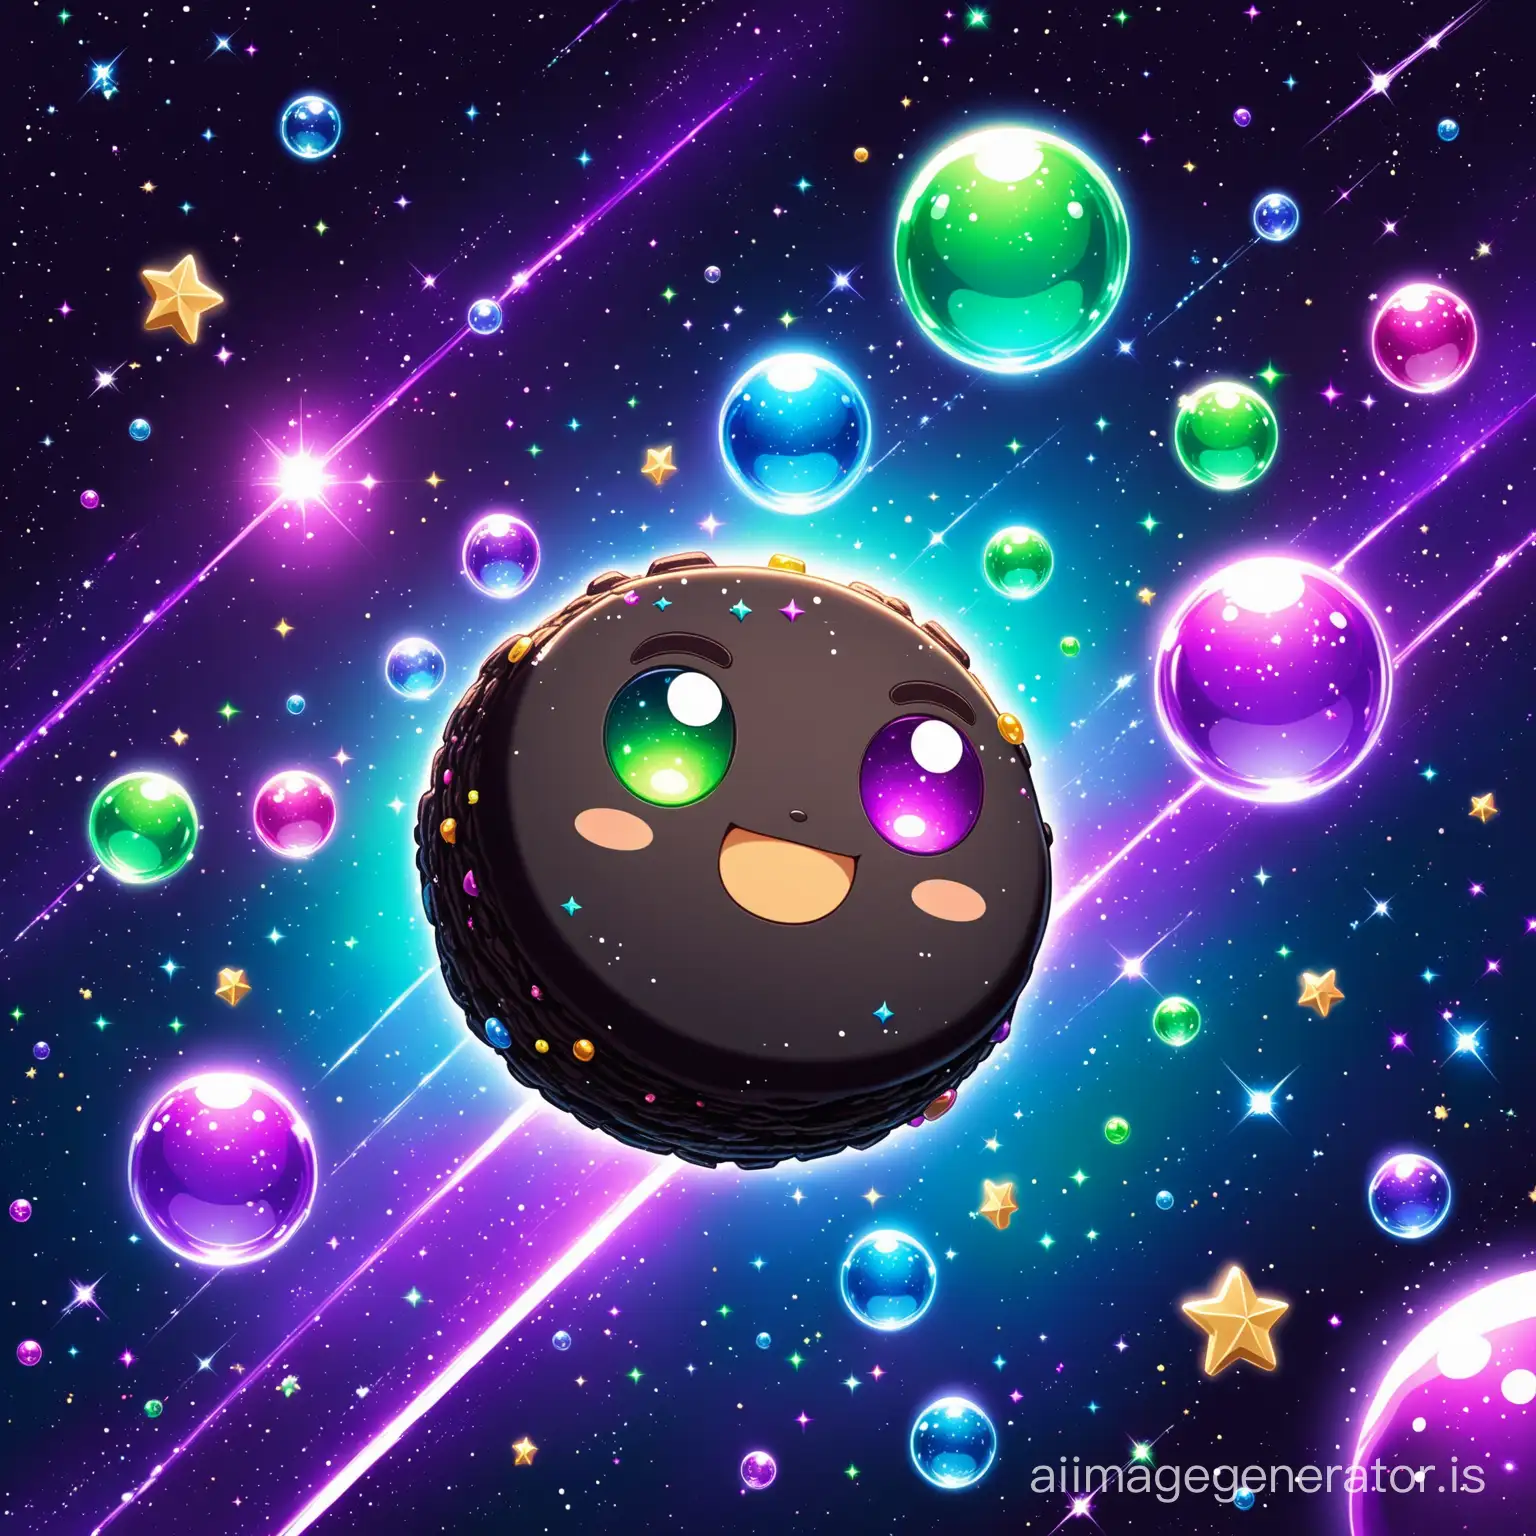 a happy black cookie with green eyes flying in space
Bubbles are scattered in the environment
also little purple blocks in space
Details are evident beautifully and with great precision